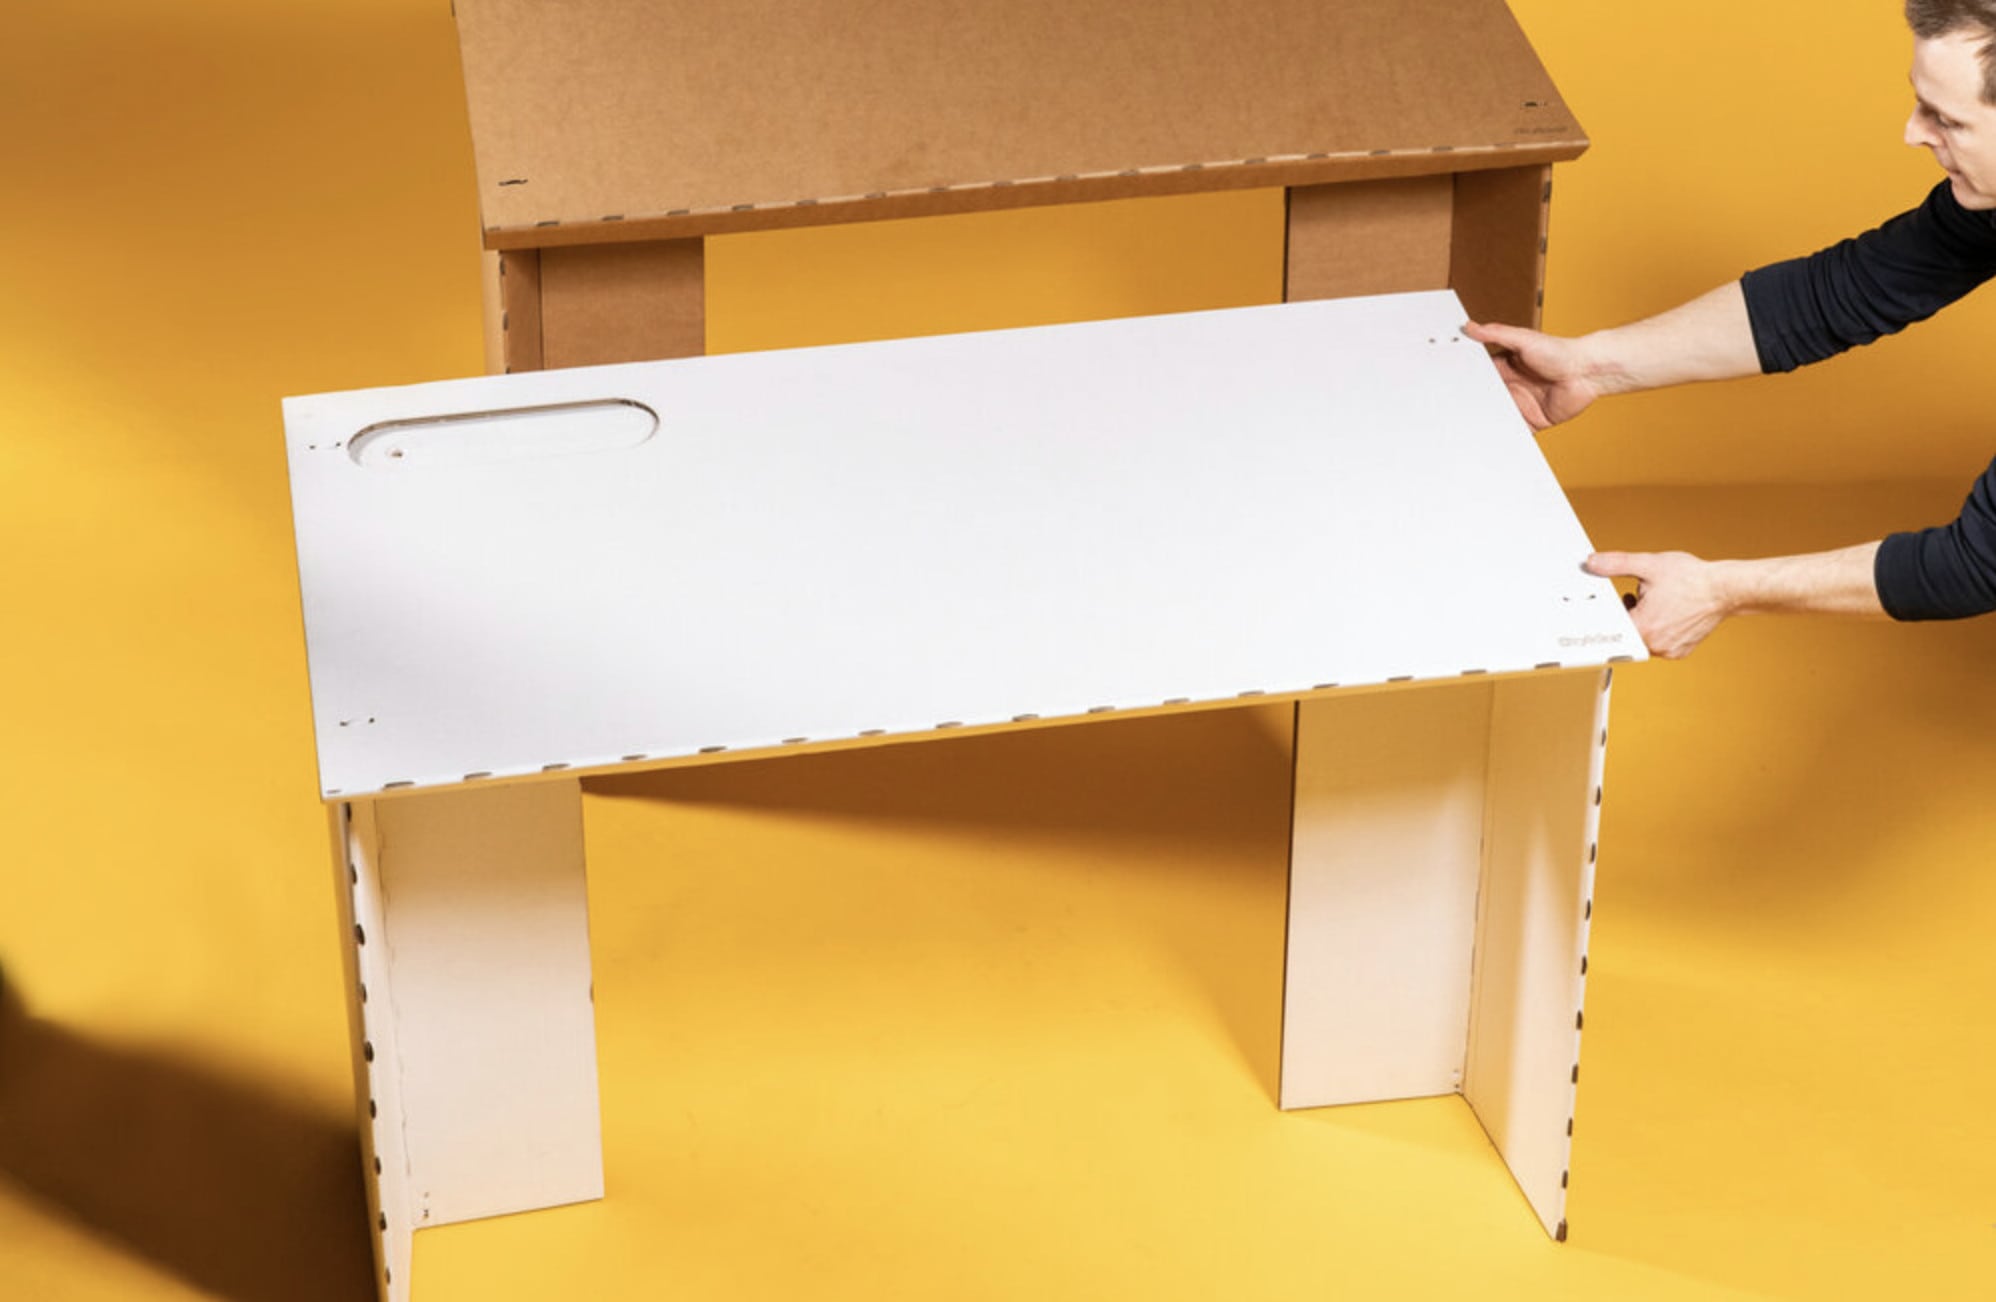 Every list of work-from-home essentials should include a desk. The Stykka desk is made almost entirely from cardboard.